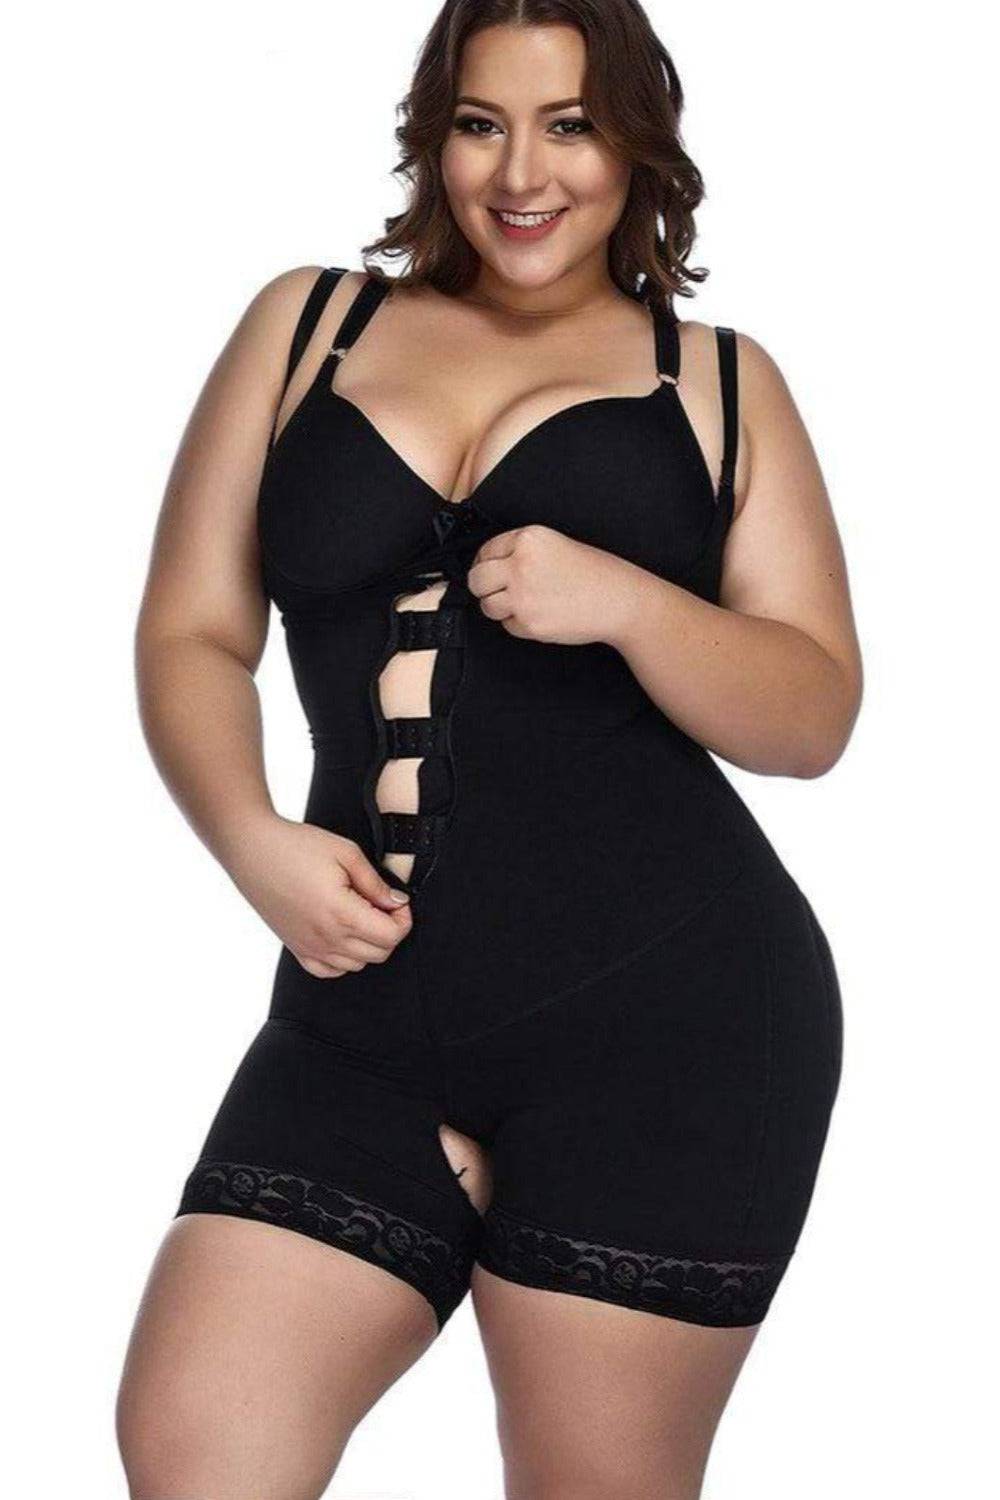 Magic Body Shaper Bra For Women Slimming Tank Top With Compression, Tummy  Control, And Postpartum Corset Design Perfect For Slimmer Underwear And  Shapewear Style 220801 From Yao04, $10.95